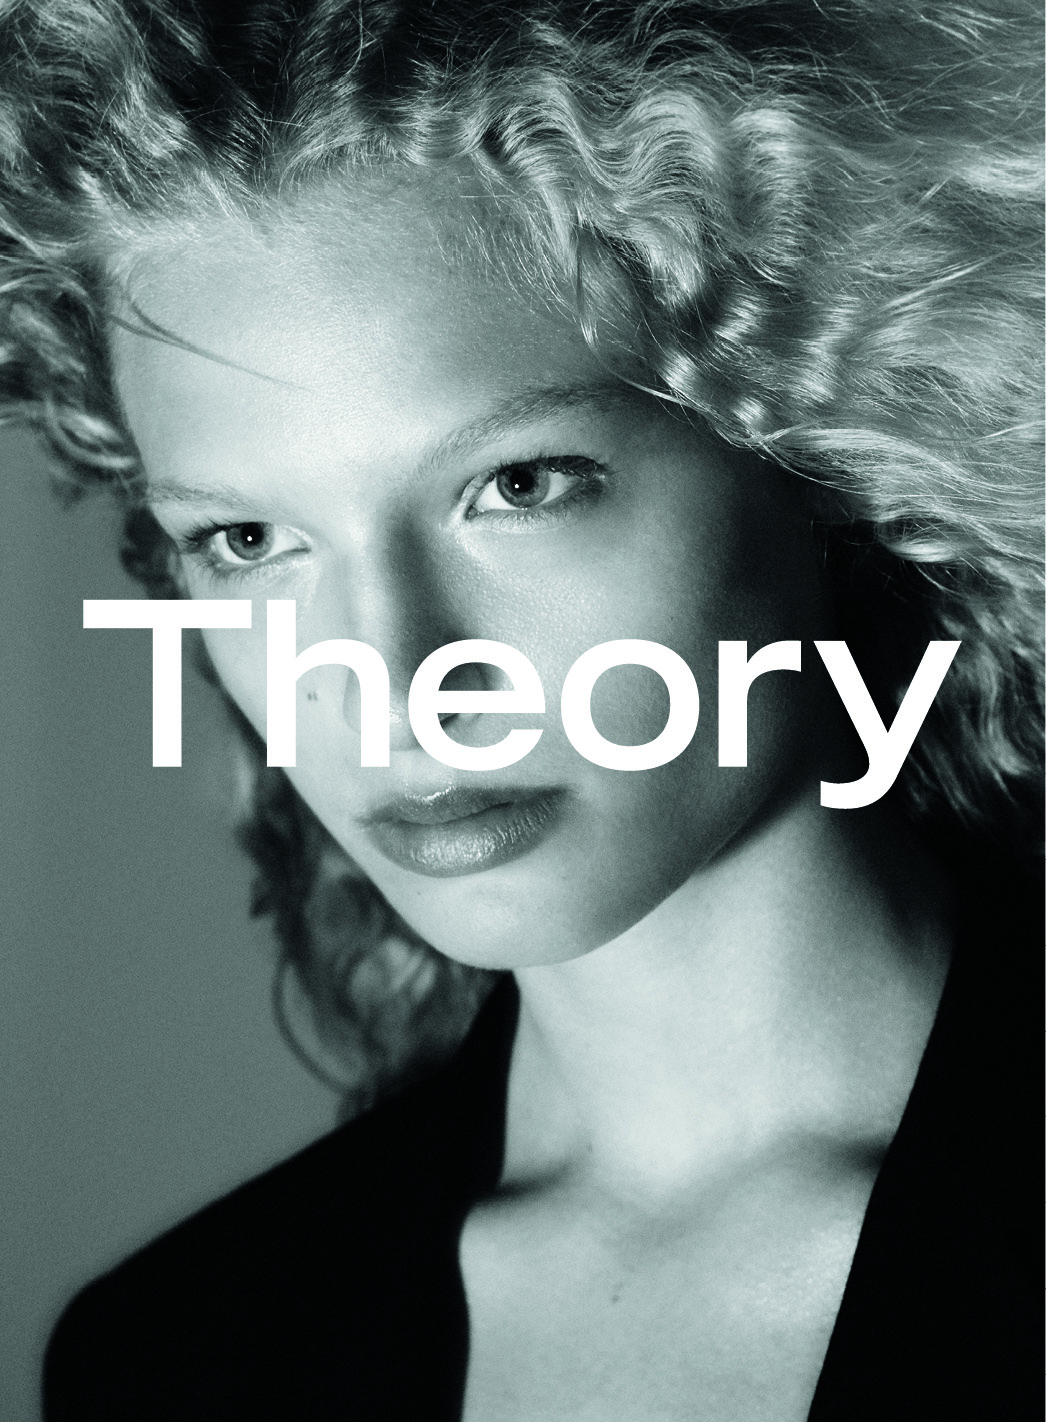 Frederikke Sofie for Theory Autumn/Winter 2016 Campaign